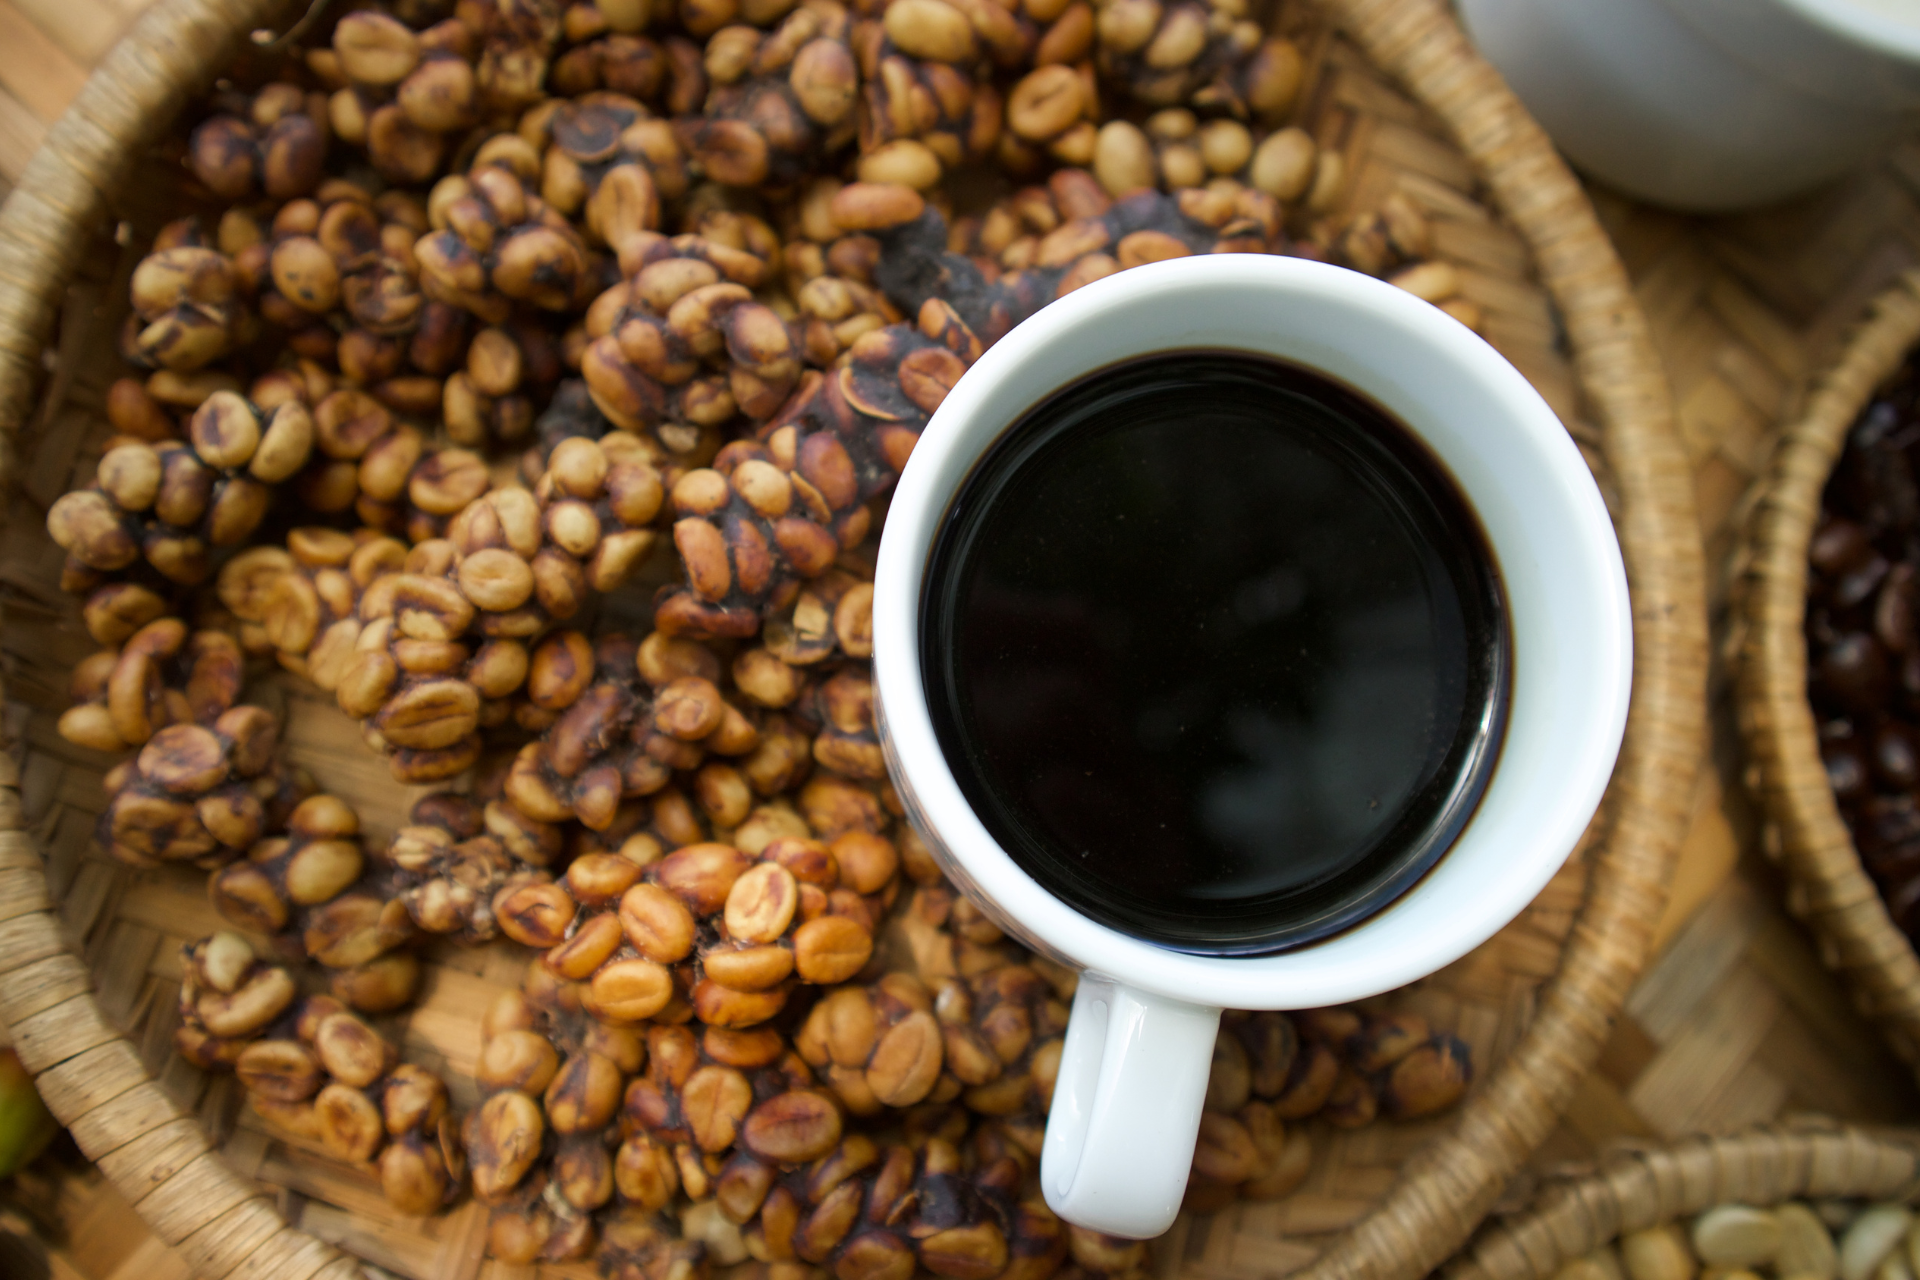 Kopi Luwak is the most expensive coffee in the world